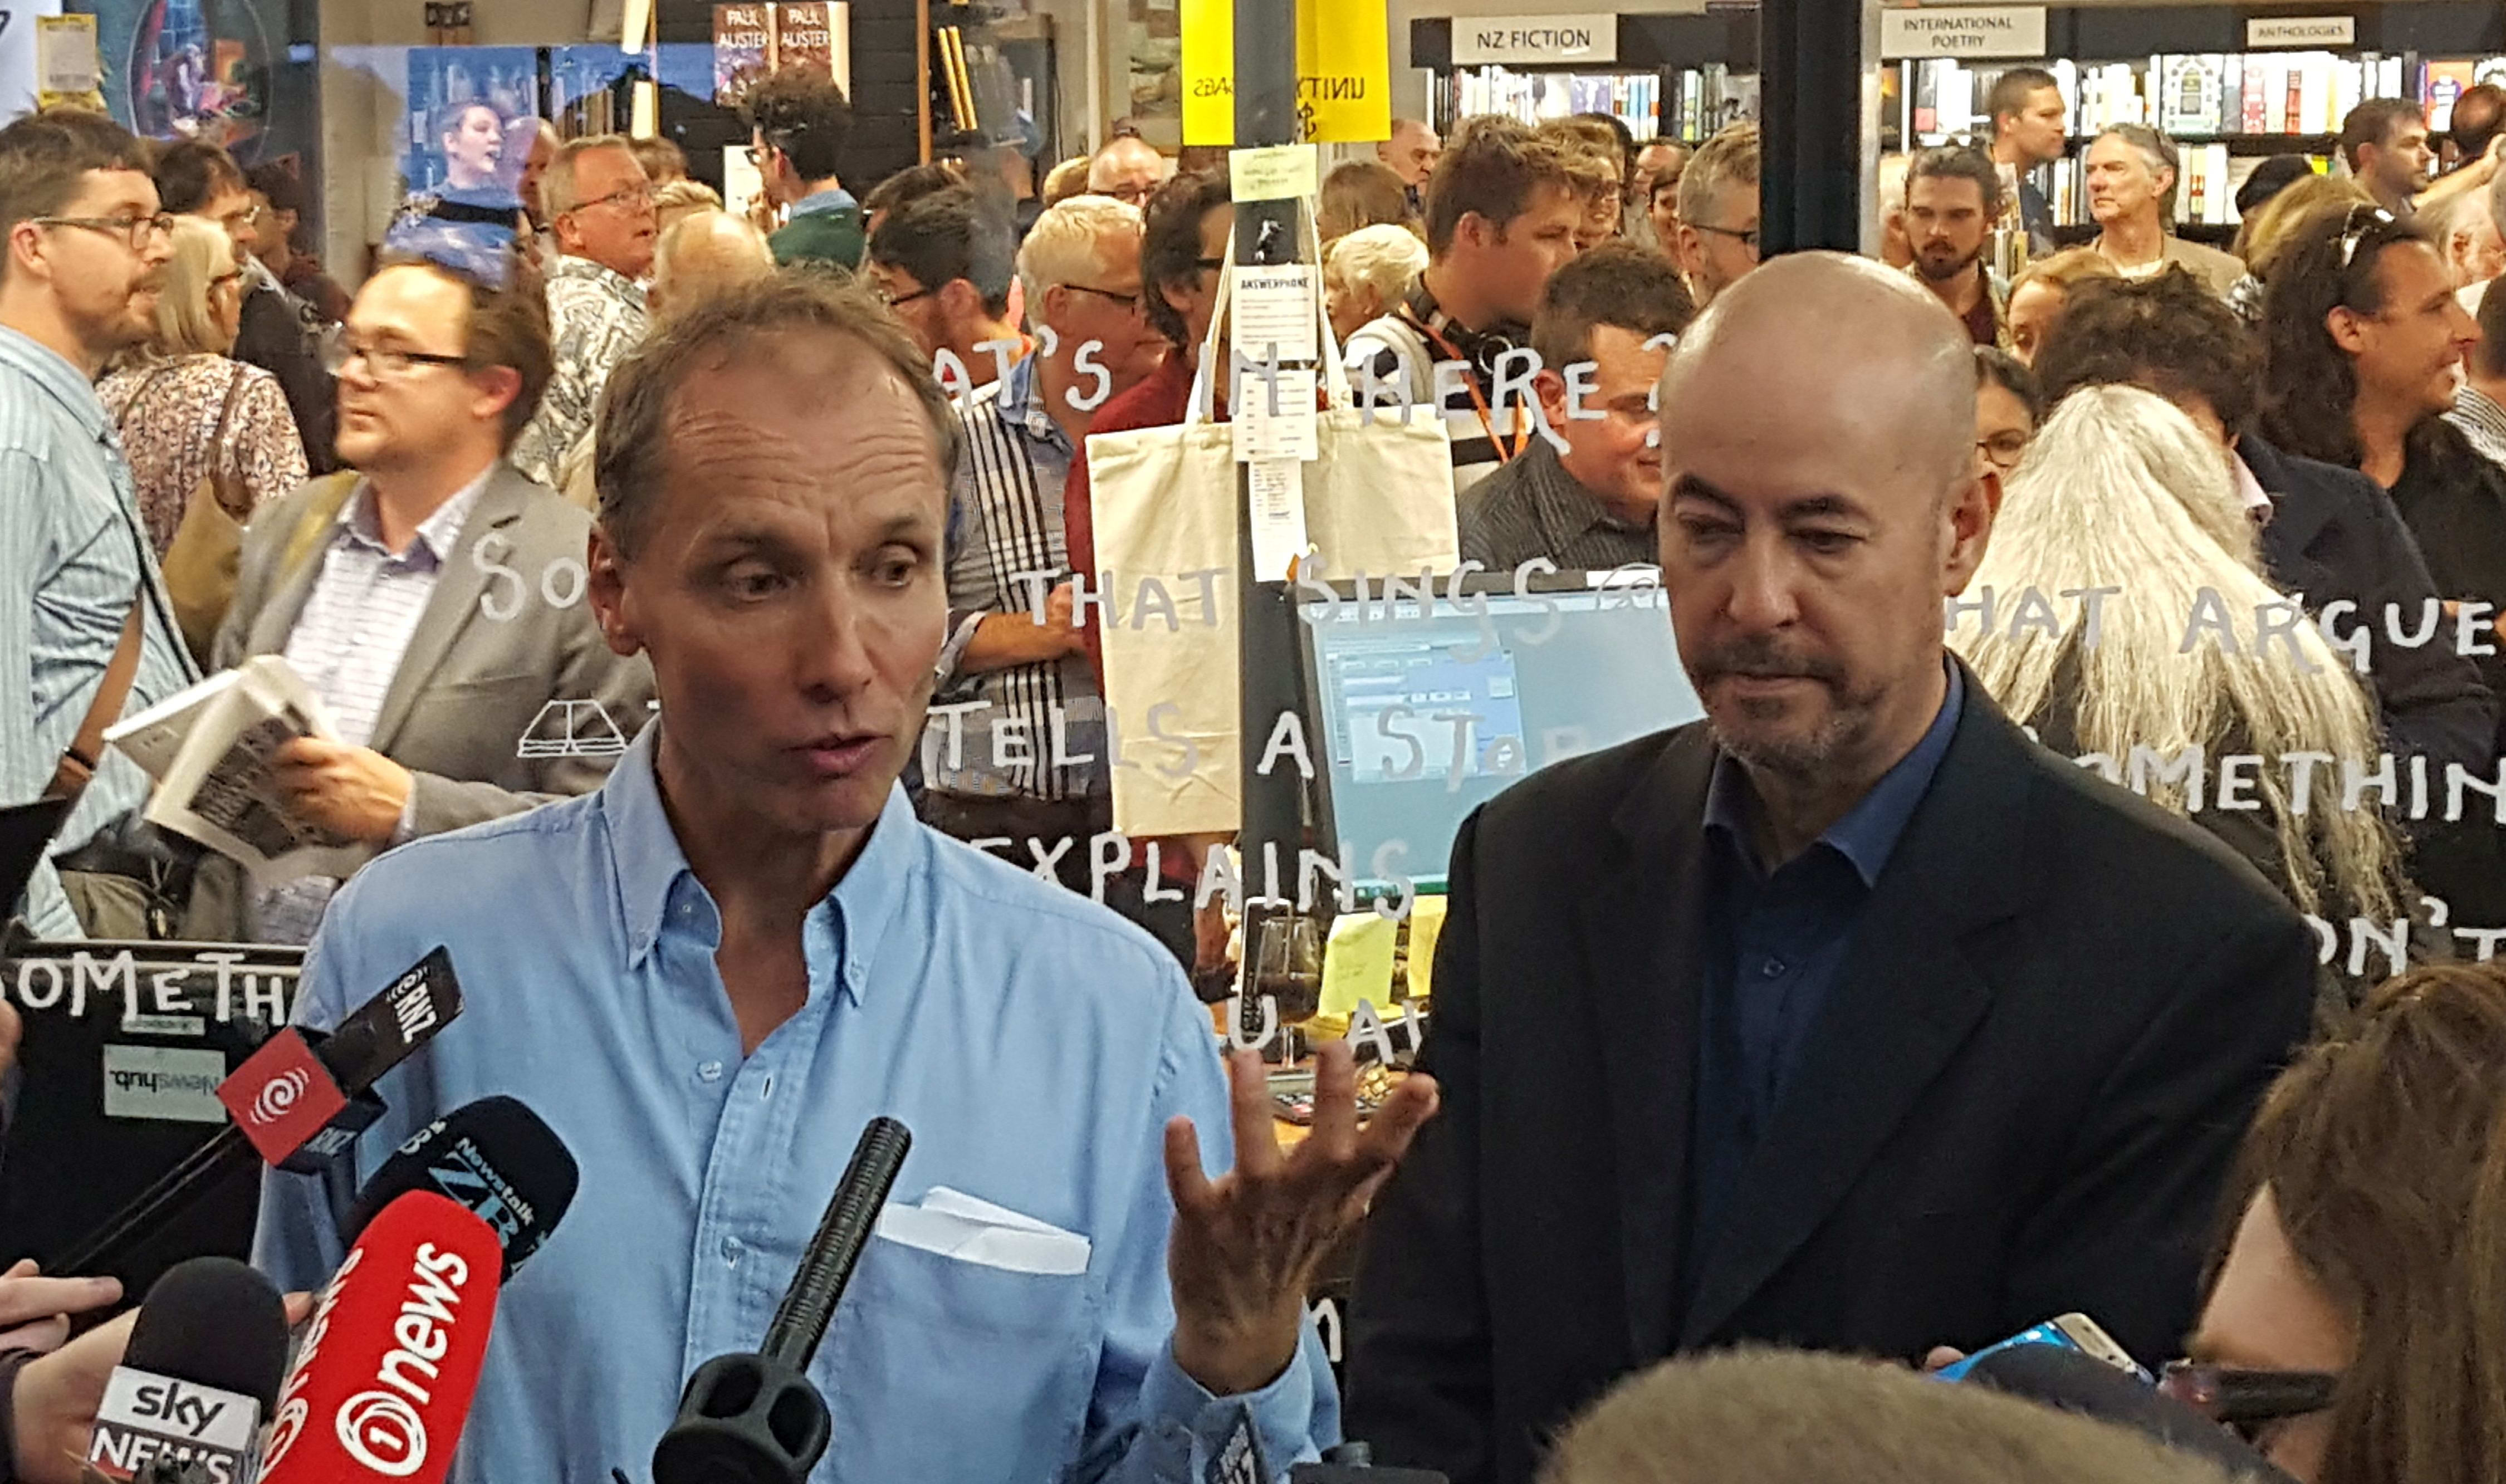 Investigative journalists Nicky Hager and Jon Stephenson have released a book, 'Hit & Run', about the New Zealand SAS in Afghanistan.